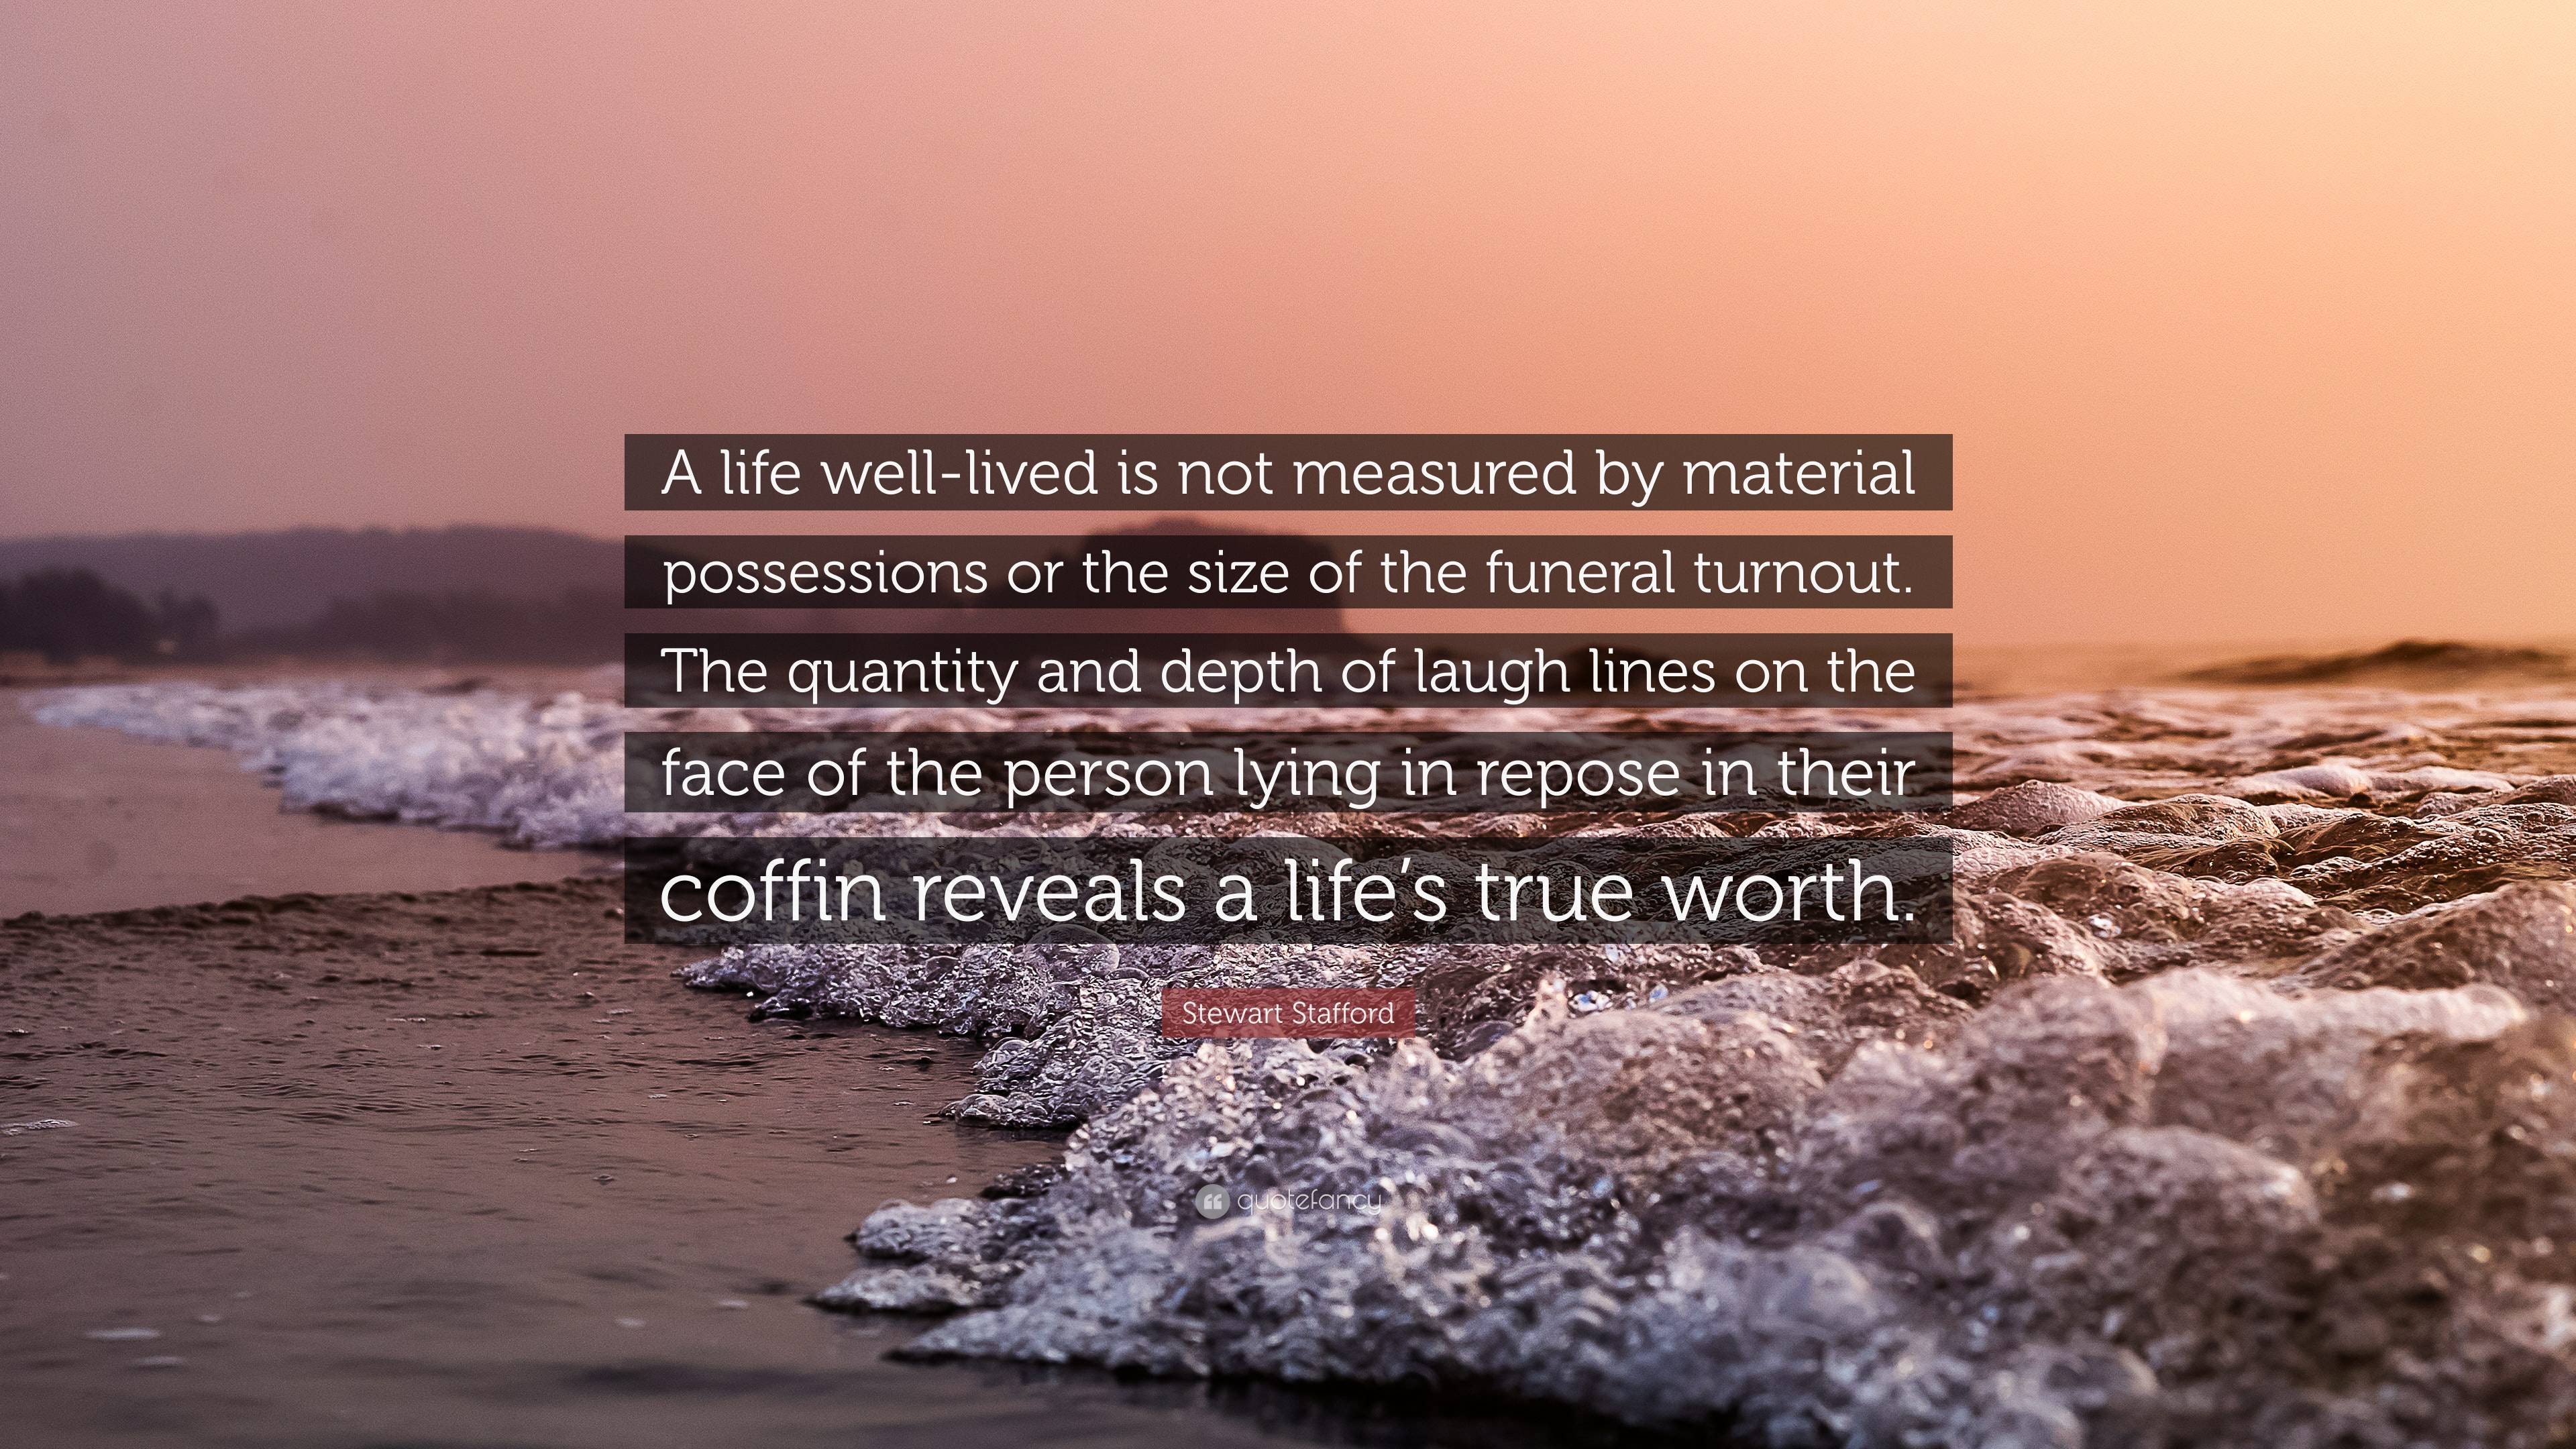 Stewart Stafford Quote: “A life well-lived is not measured by